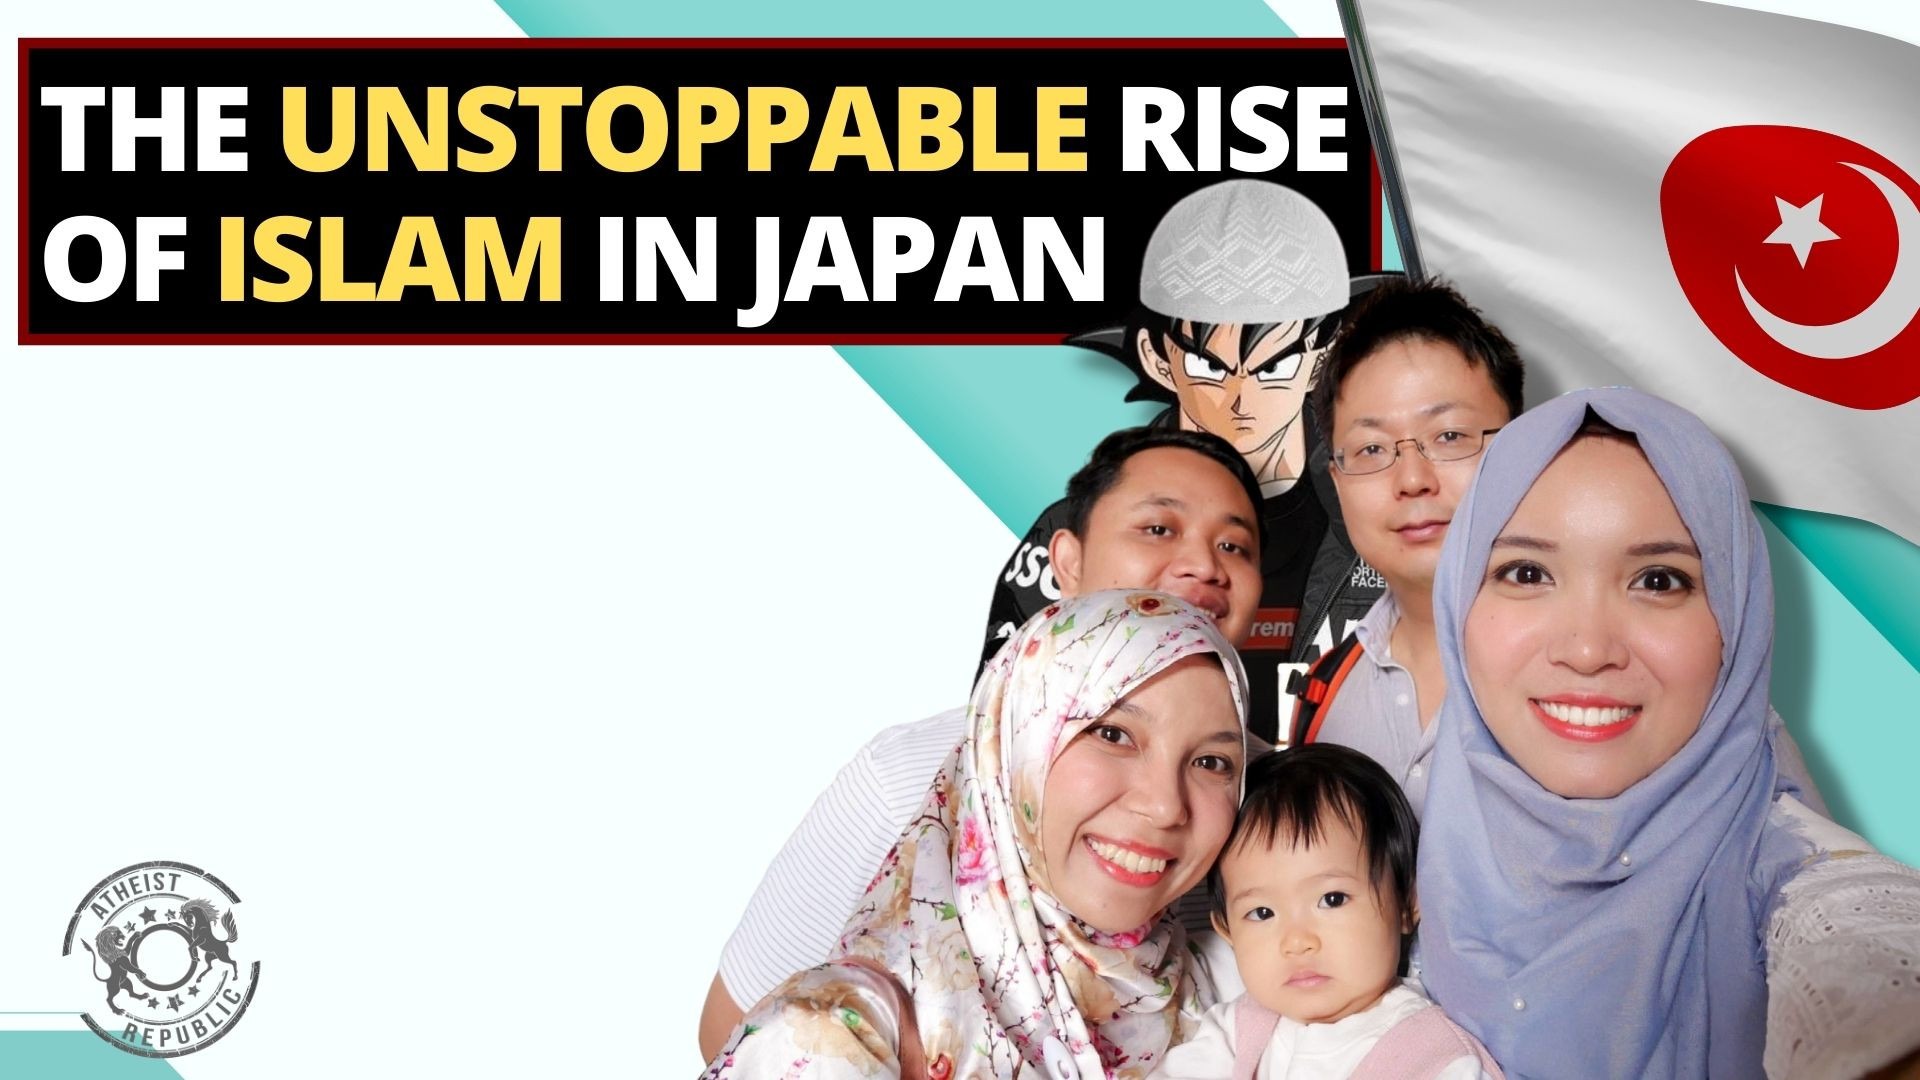 The Unstoppable Rise of Islam in Japan